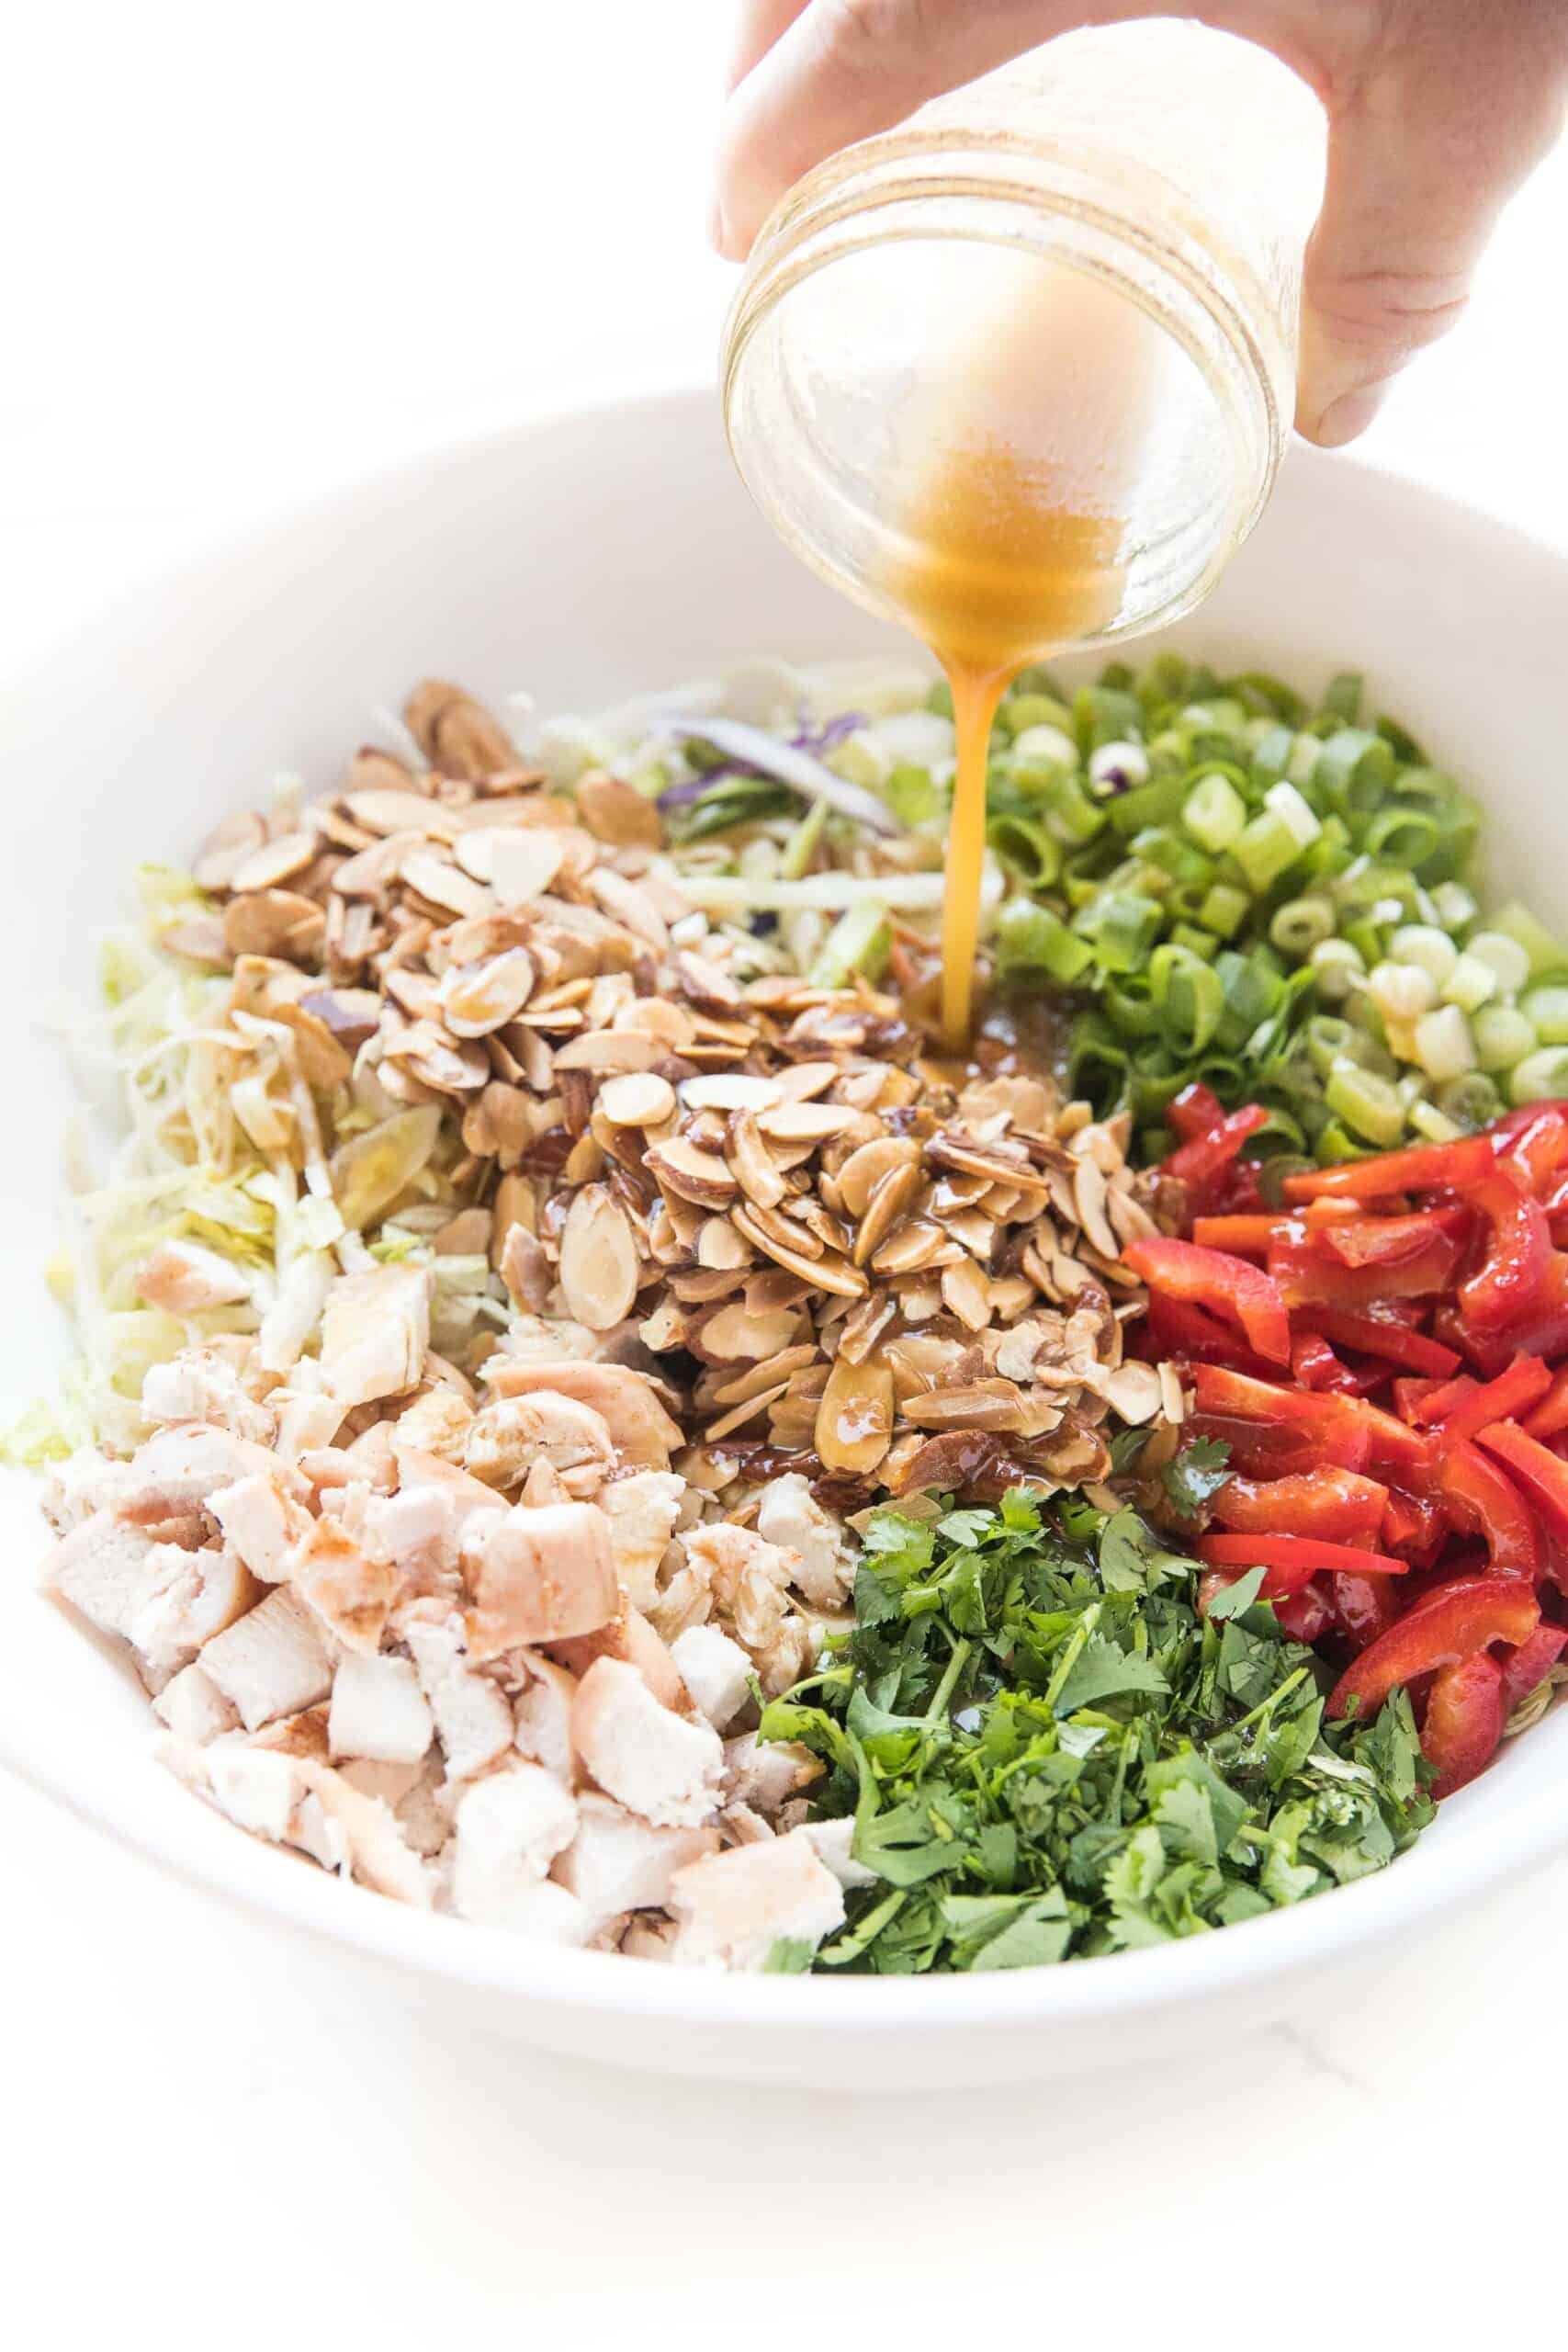 homemade asian dressing being poured over chinese chicken salad in a white bowl